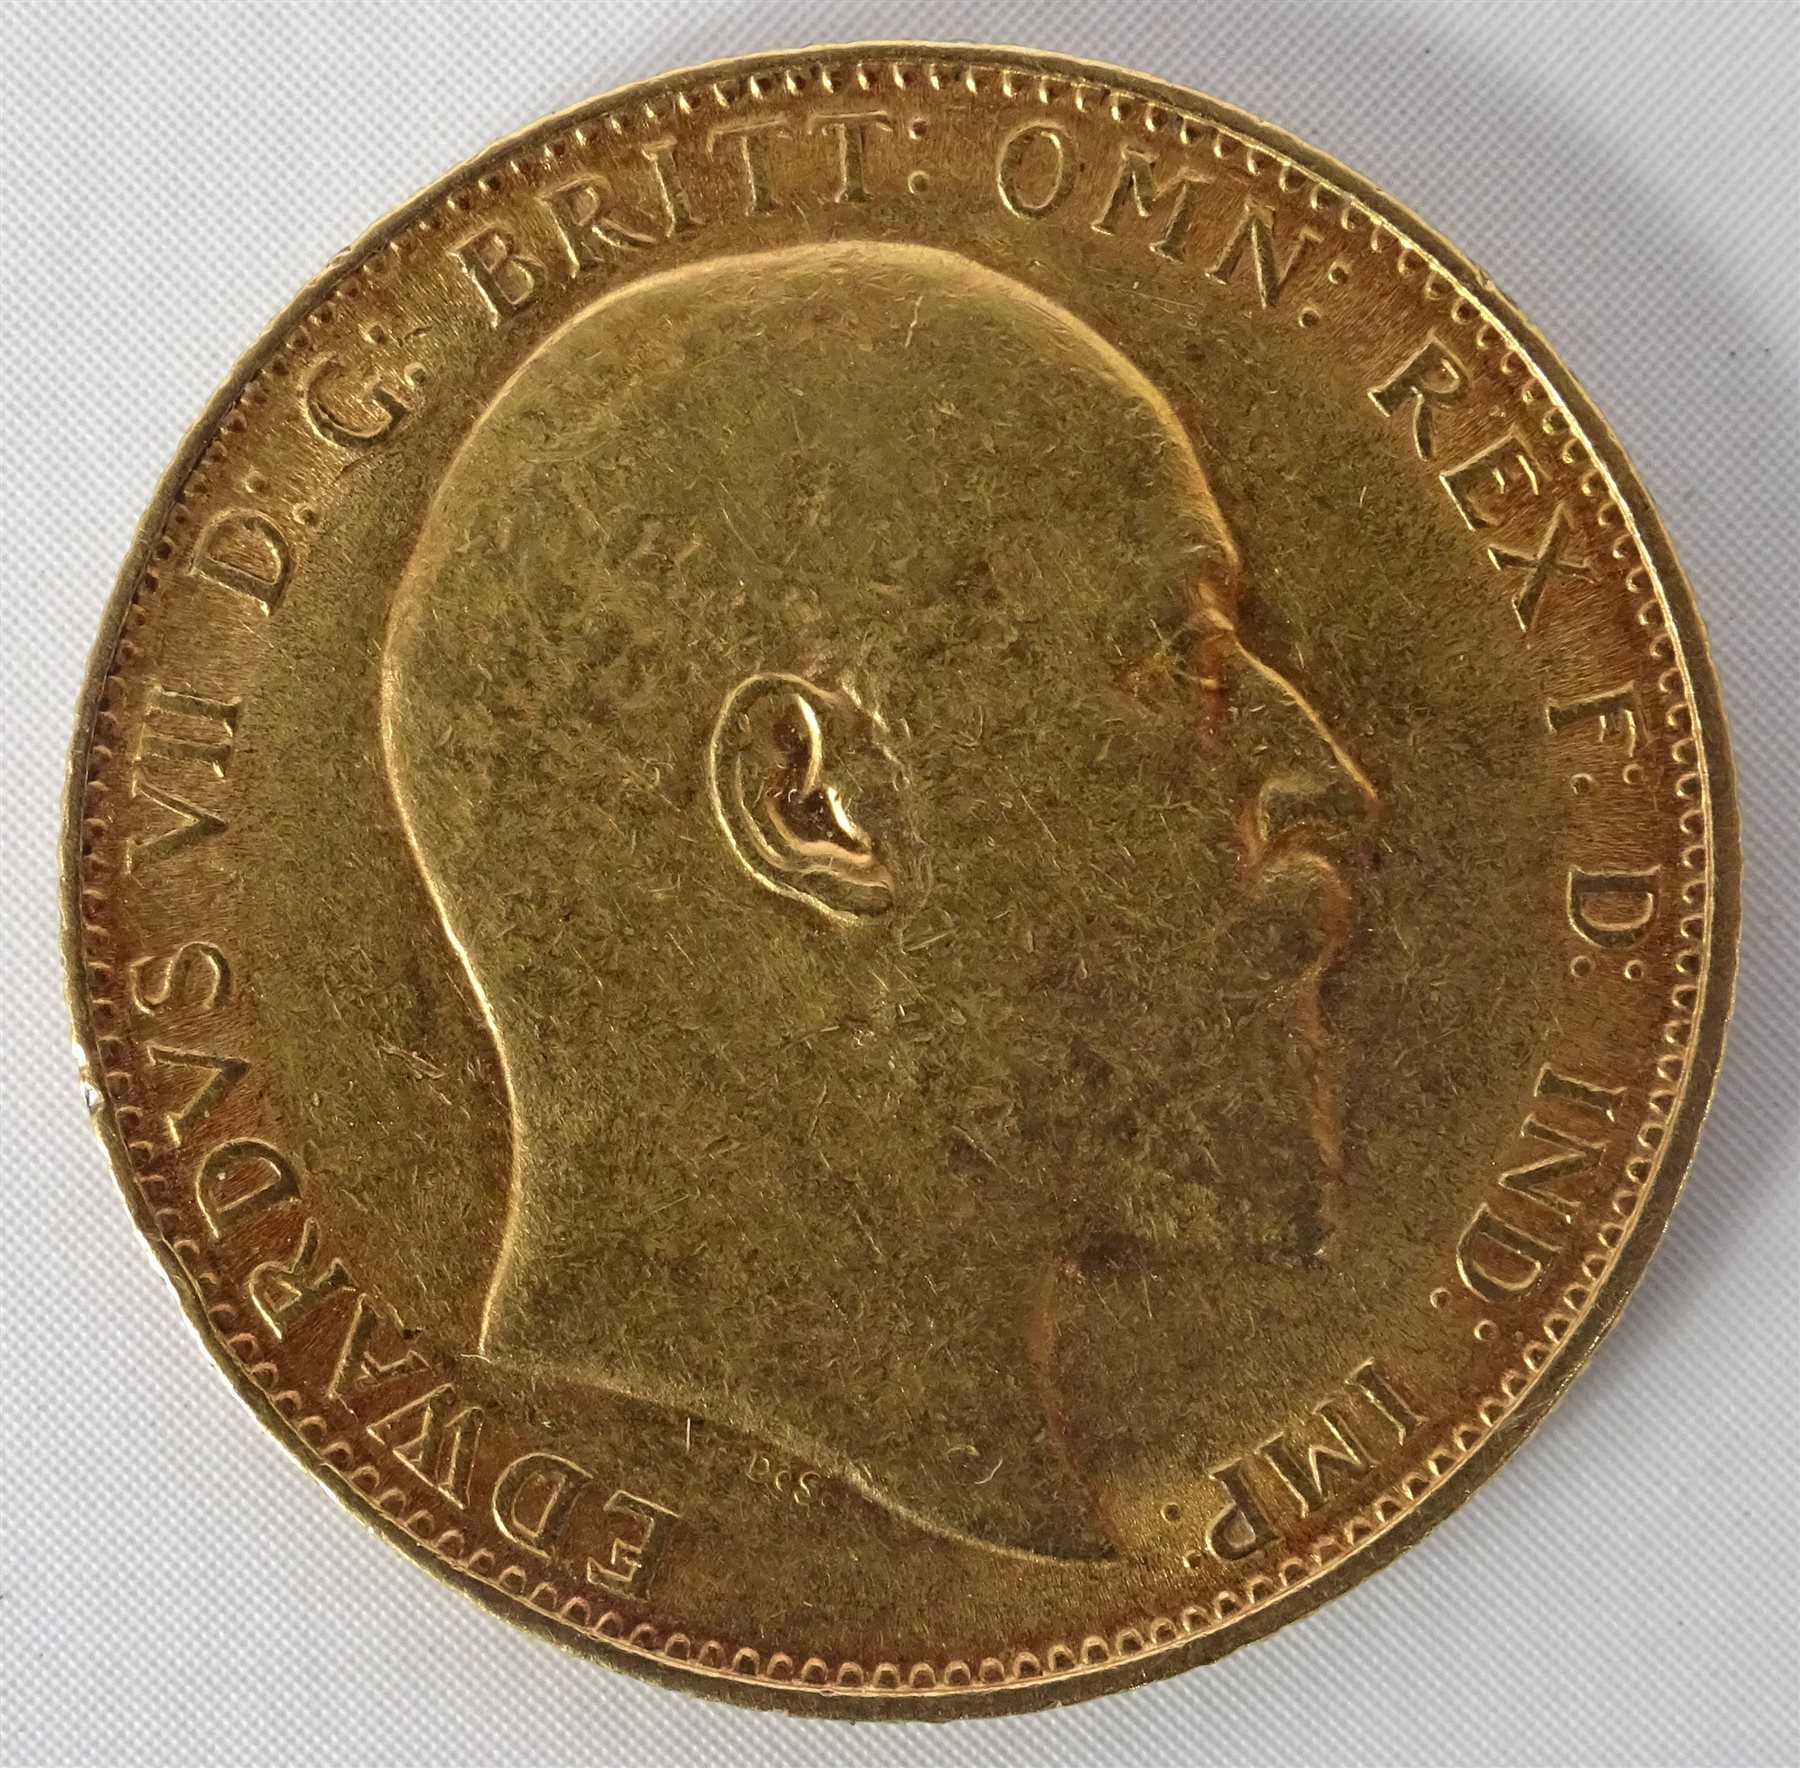 Edward VII gold 1907 sovereign - Coins, Banknotes & Stamps